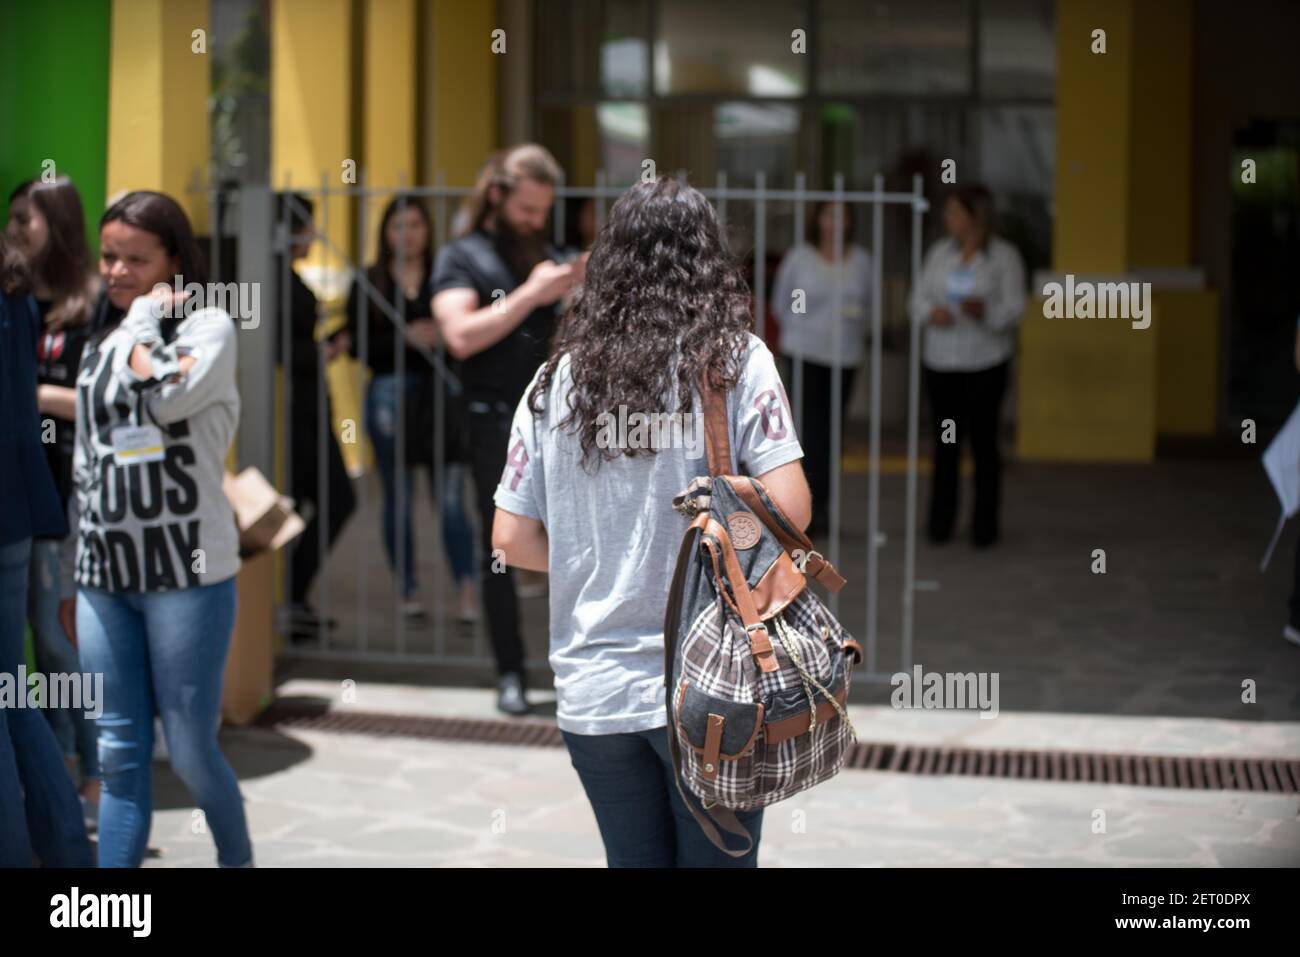 SC - Leges - 04/11/2018 - Enem 2018 Santa Catarina - Students arrive late for the Exame Nacional do Ensino Médio test in Lages, Santa Catarina this afternoon, the first day of tests. Photo: Fom Conradi / AGIF/Sipa USA Stock Photo